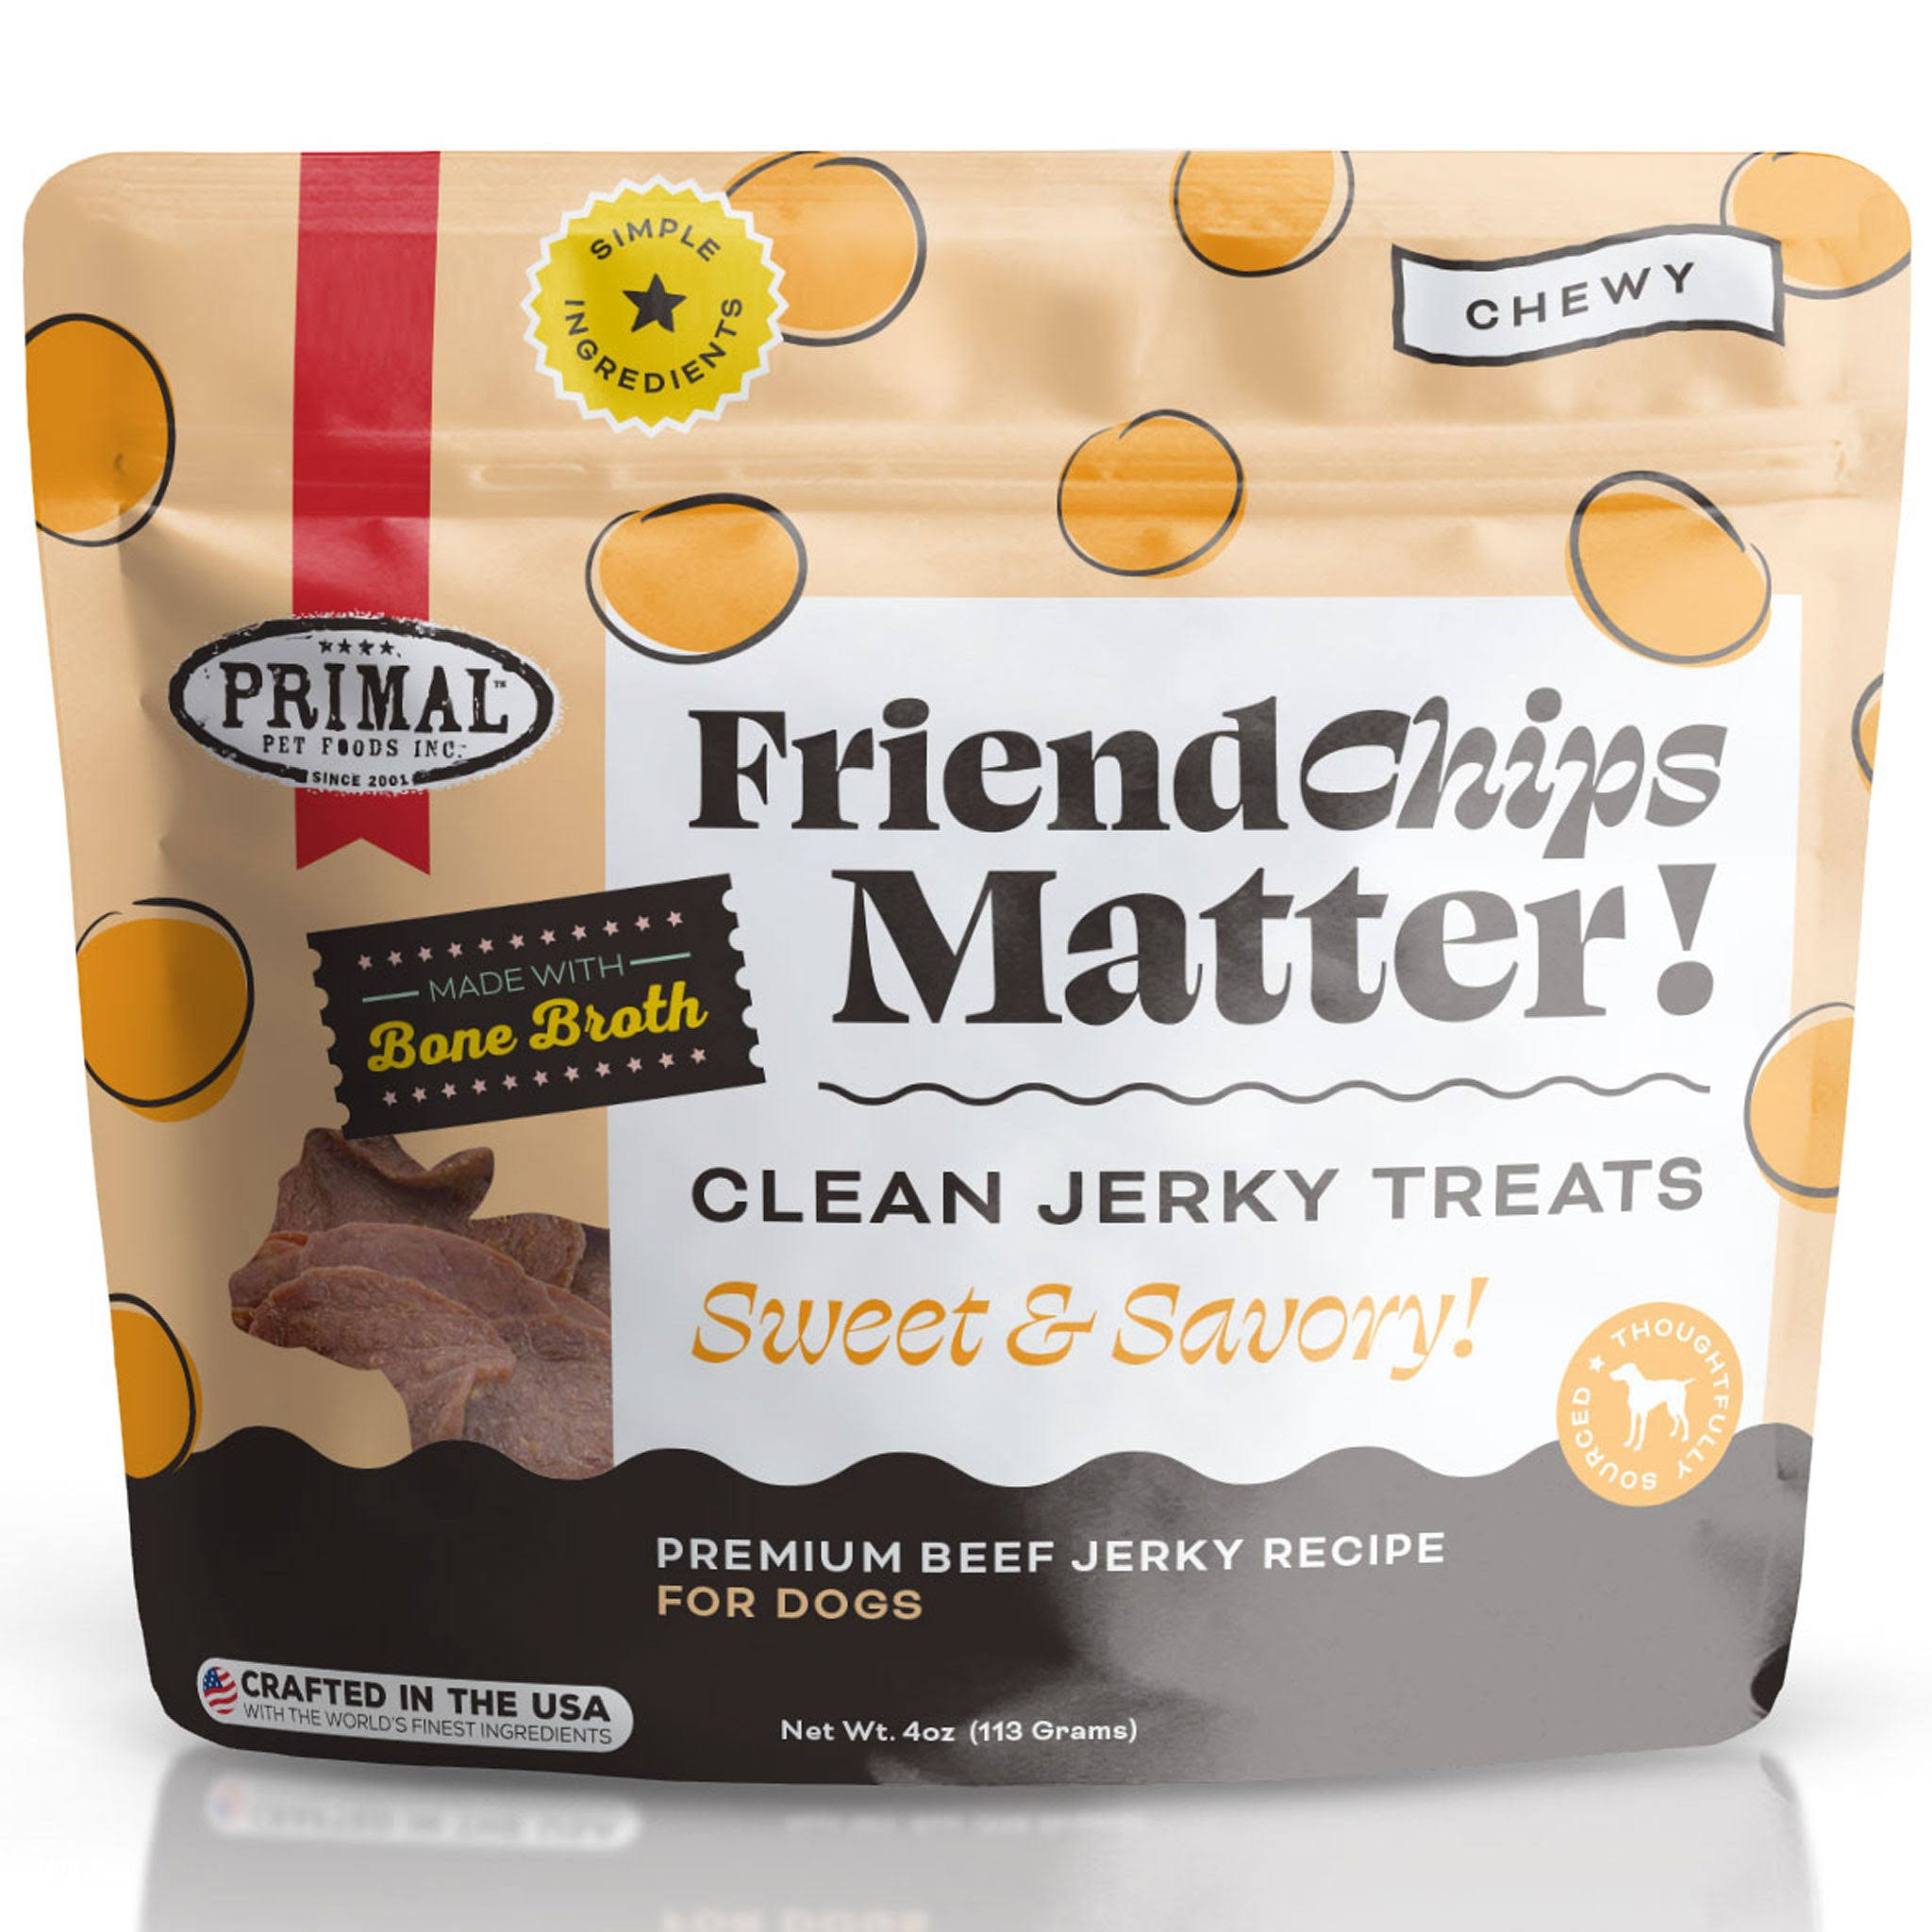 Healthy Snacks for Dogs & Cats | Primal Friendchips Matter Beef Dog Treats - 4 oz | All Natural Dog Treats